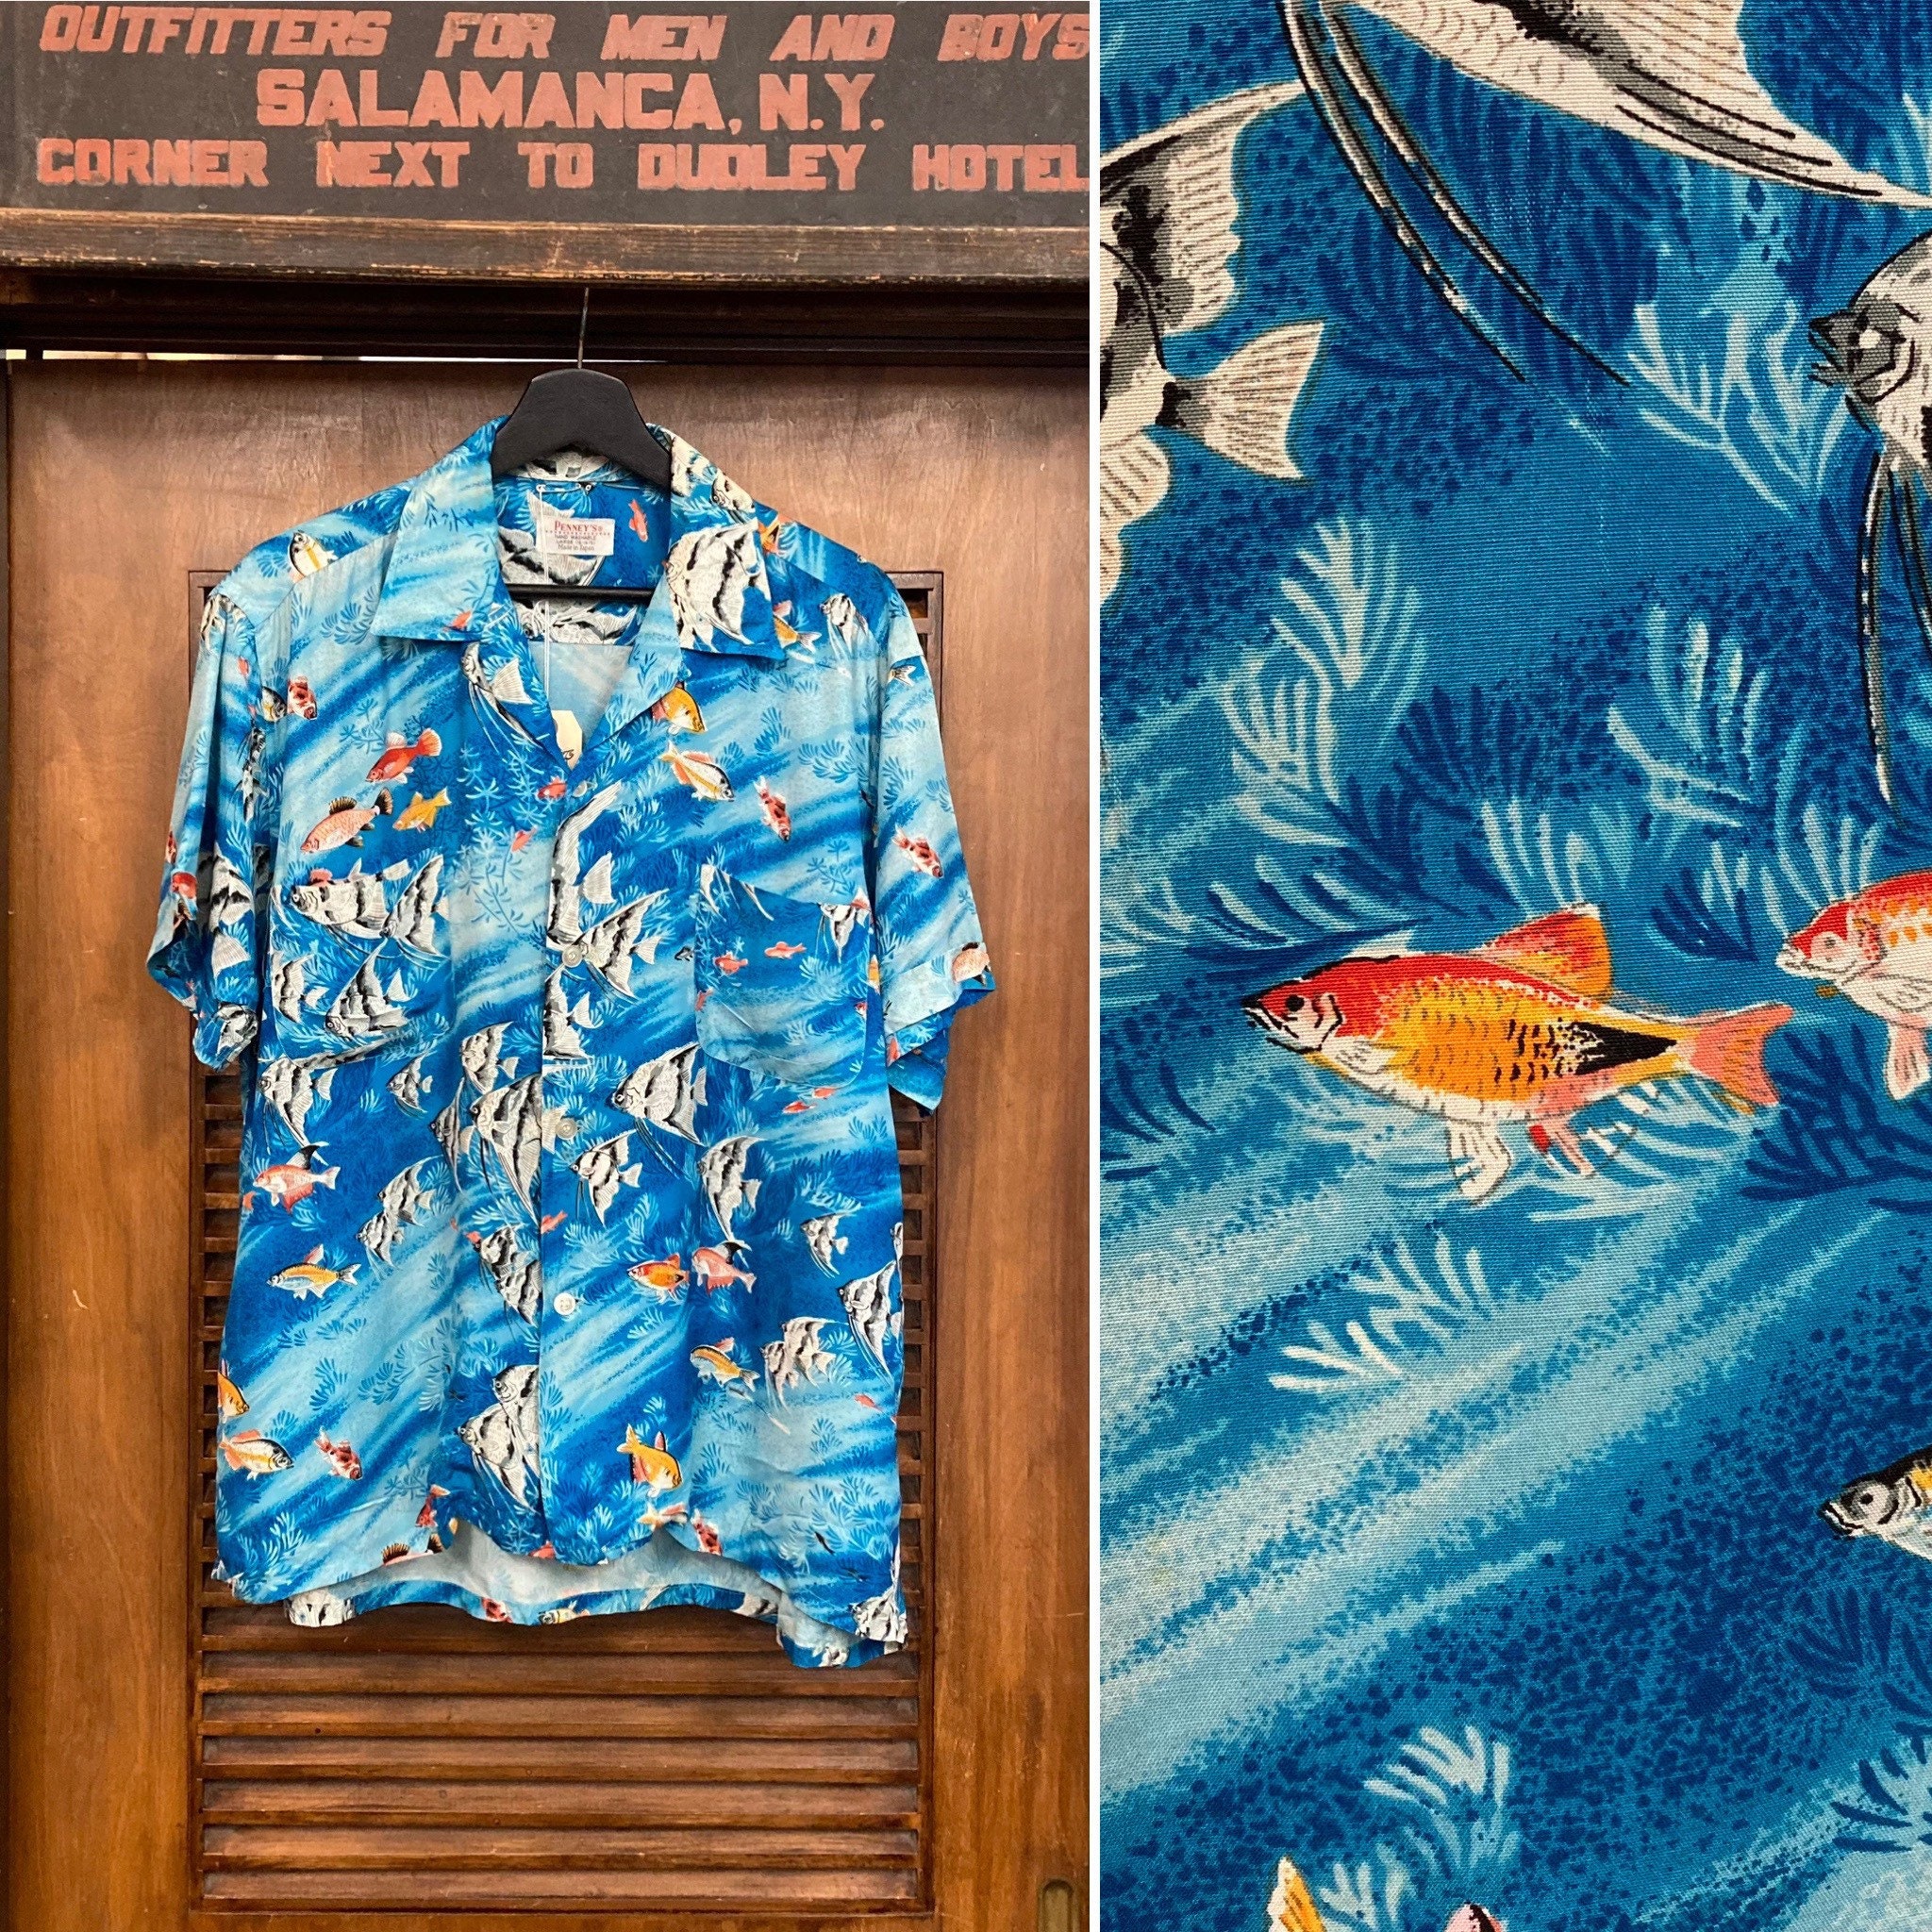 Vintage 1950's Penney's Label Underwater Fish Rayon Hawaiian Shirt, 50's Tropical, Vintage Clothing